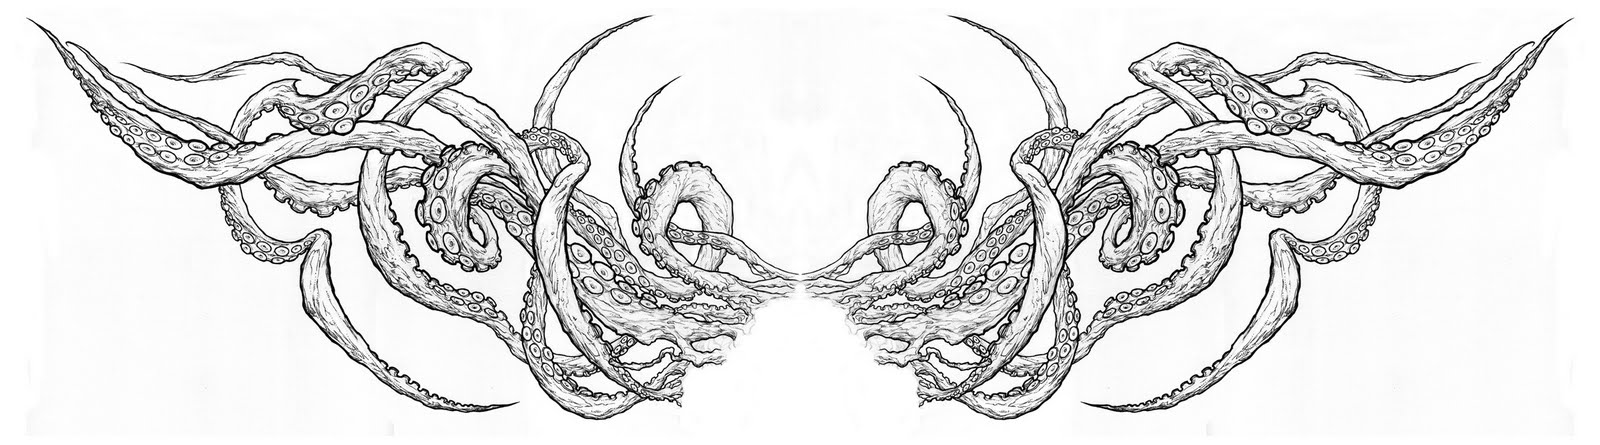 A Wolf Illustrations Blog: Octopus Tentacles